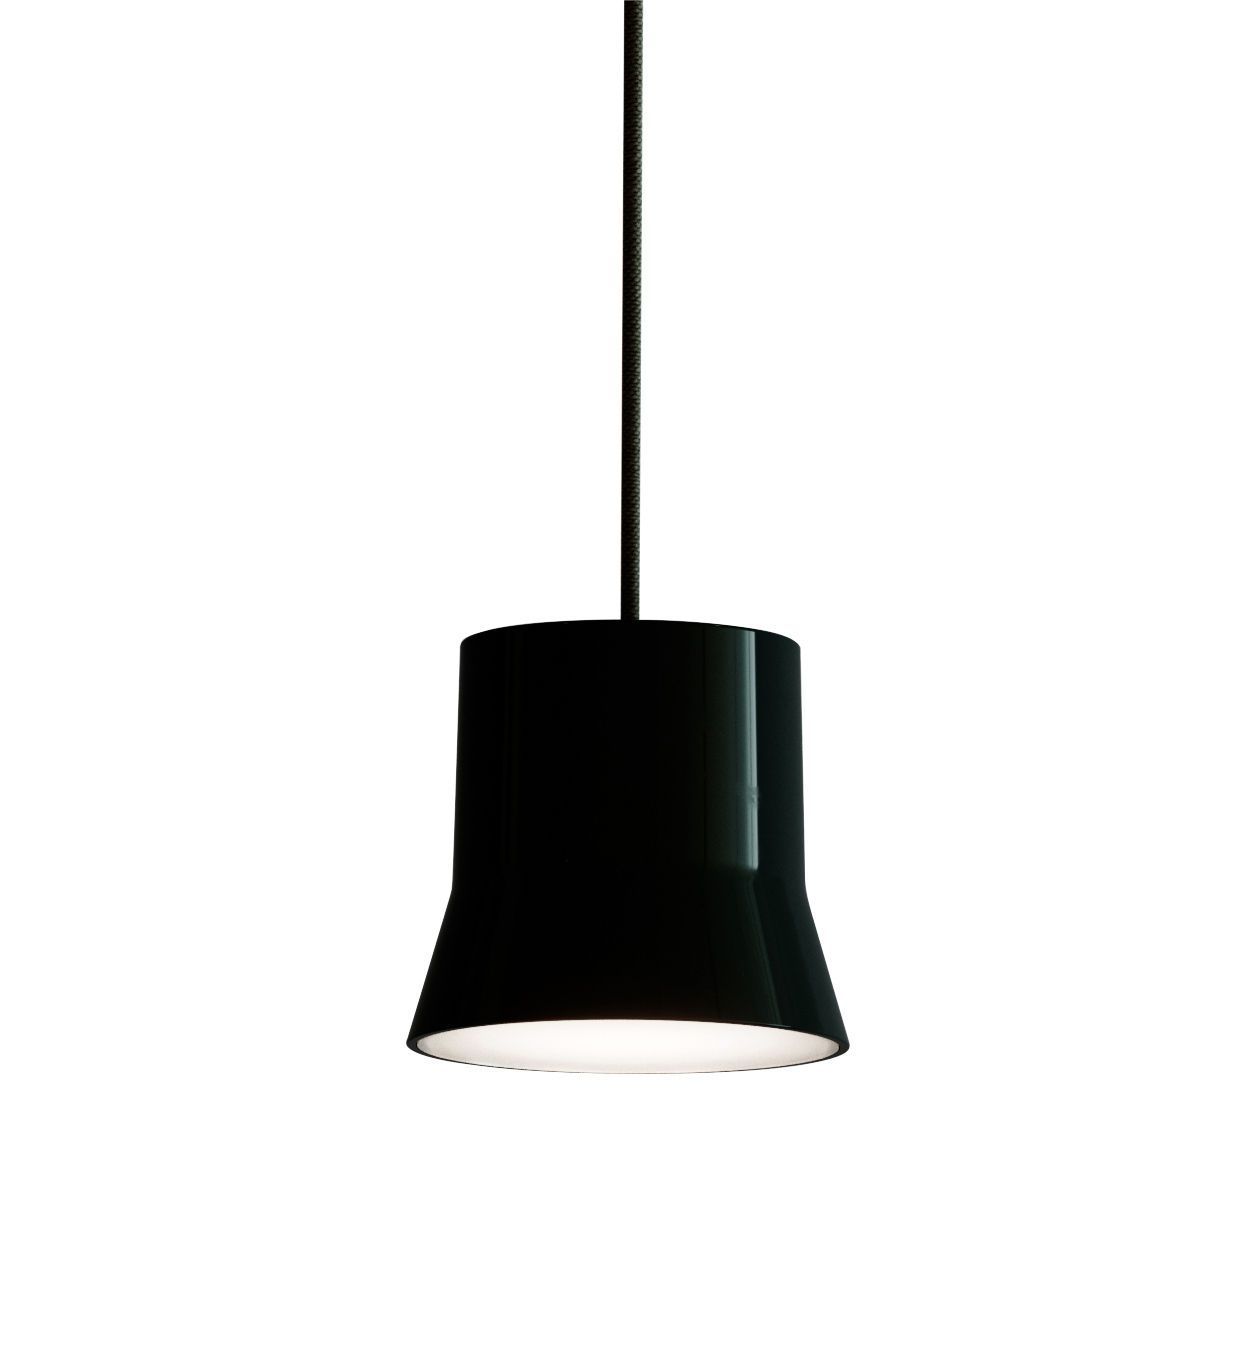 Hanging lamp Gio by Artemide